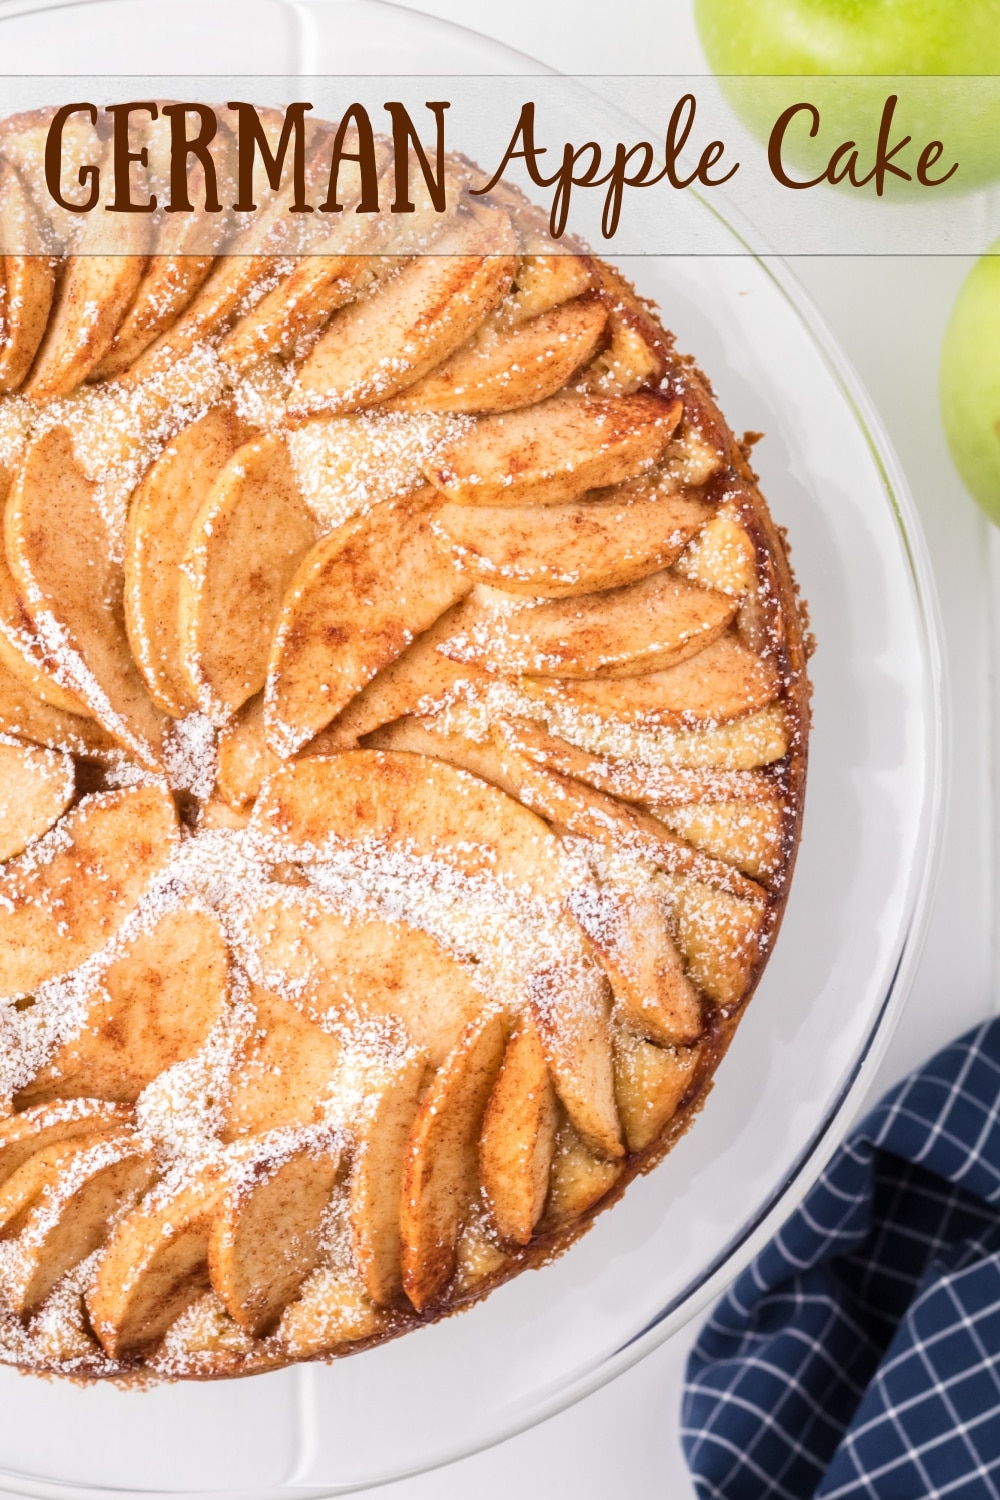 German Apple Cake is a  favorite, single-layered dessert. The simple, vanilla-flavored batter rises perfectly around thinly sliced, fanned apples and finished with a generous dusting of confectioners' sugar. via @cmpollak1